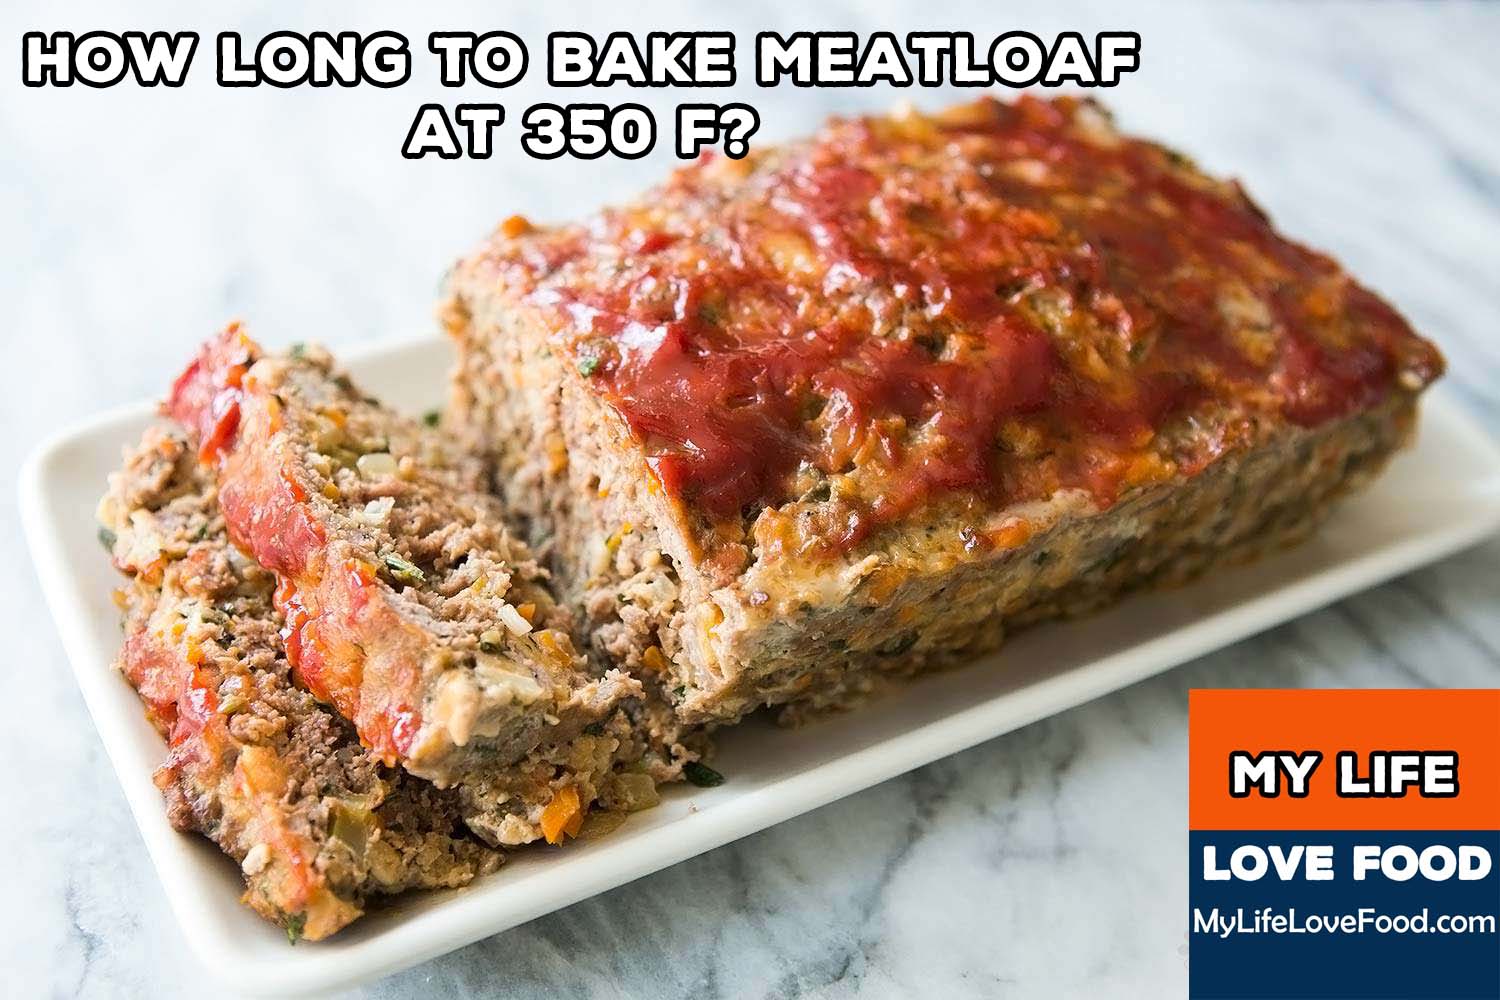 How Long to Bake Meatloaf at 350 F? - MyLifeLoveFood